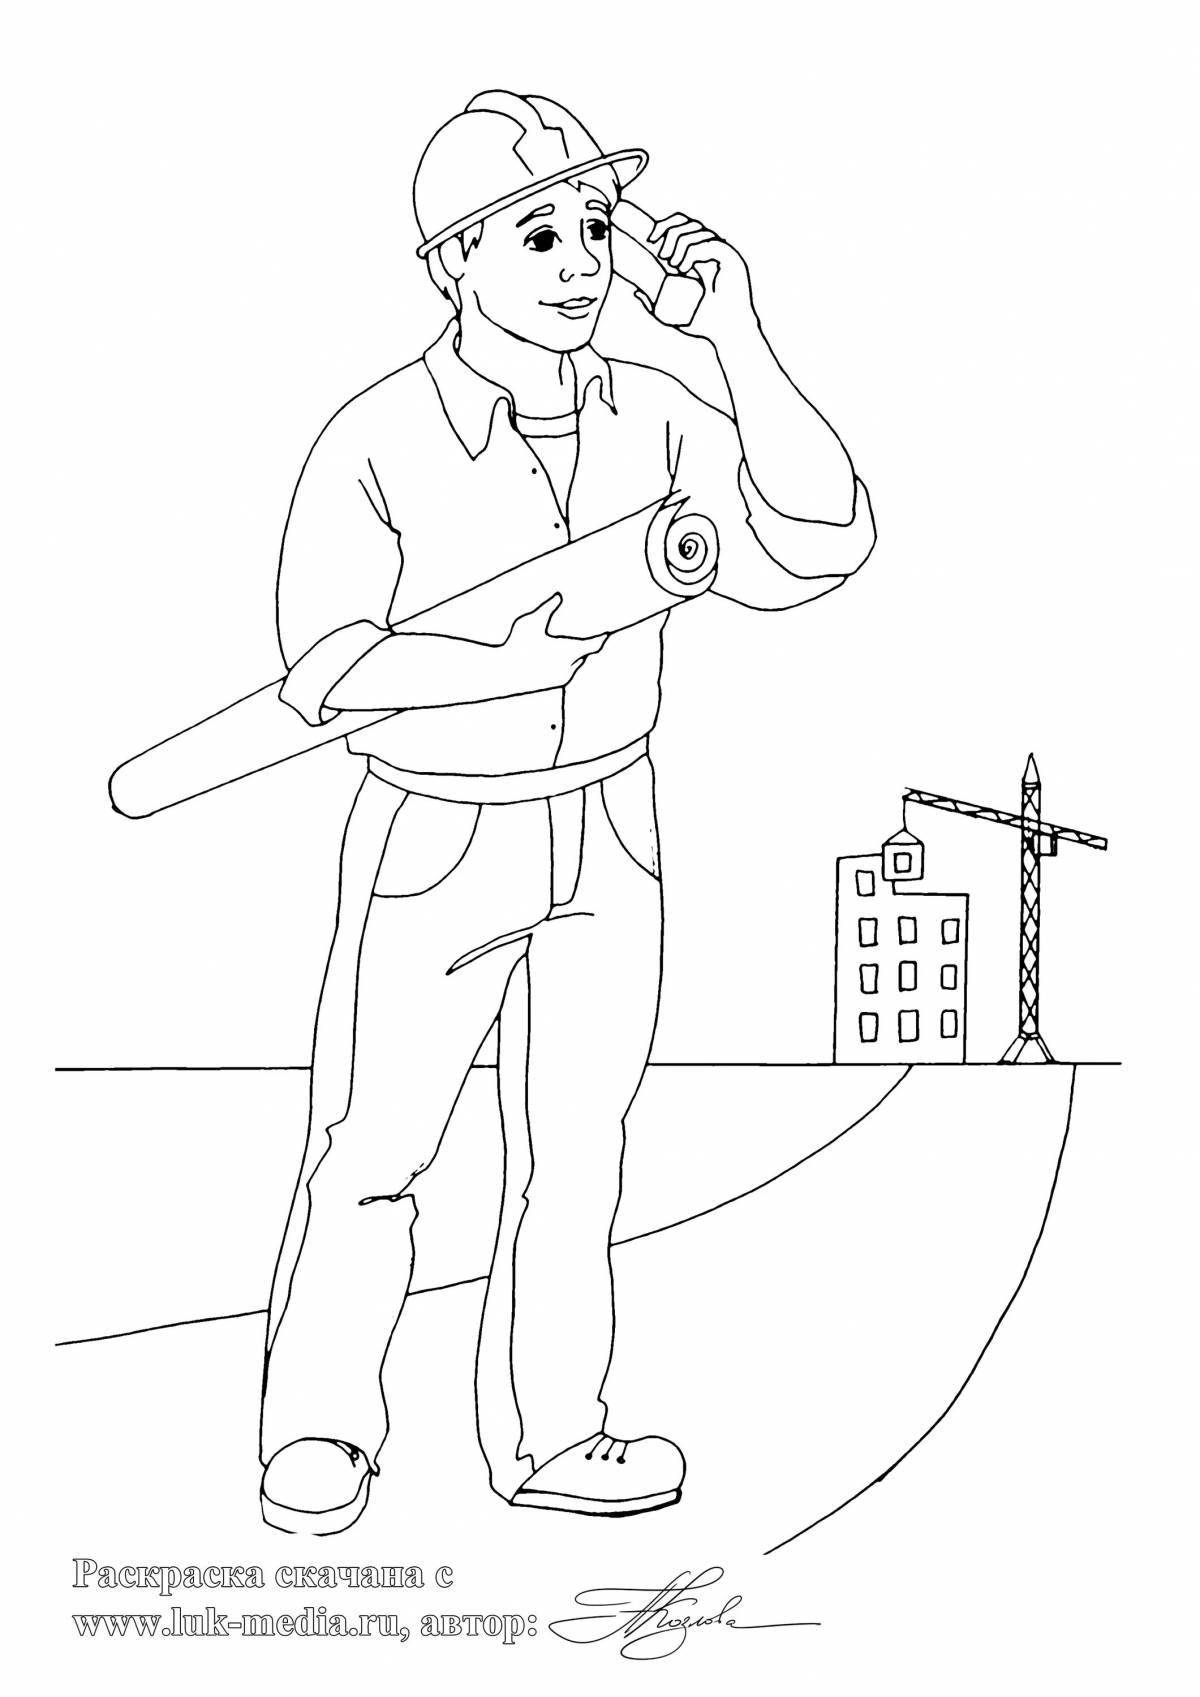 Passionate engineer coloring book